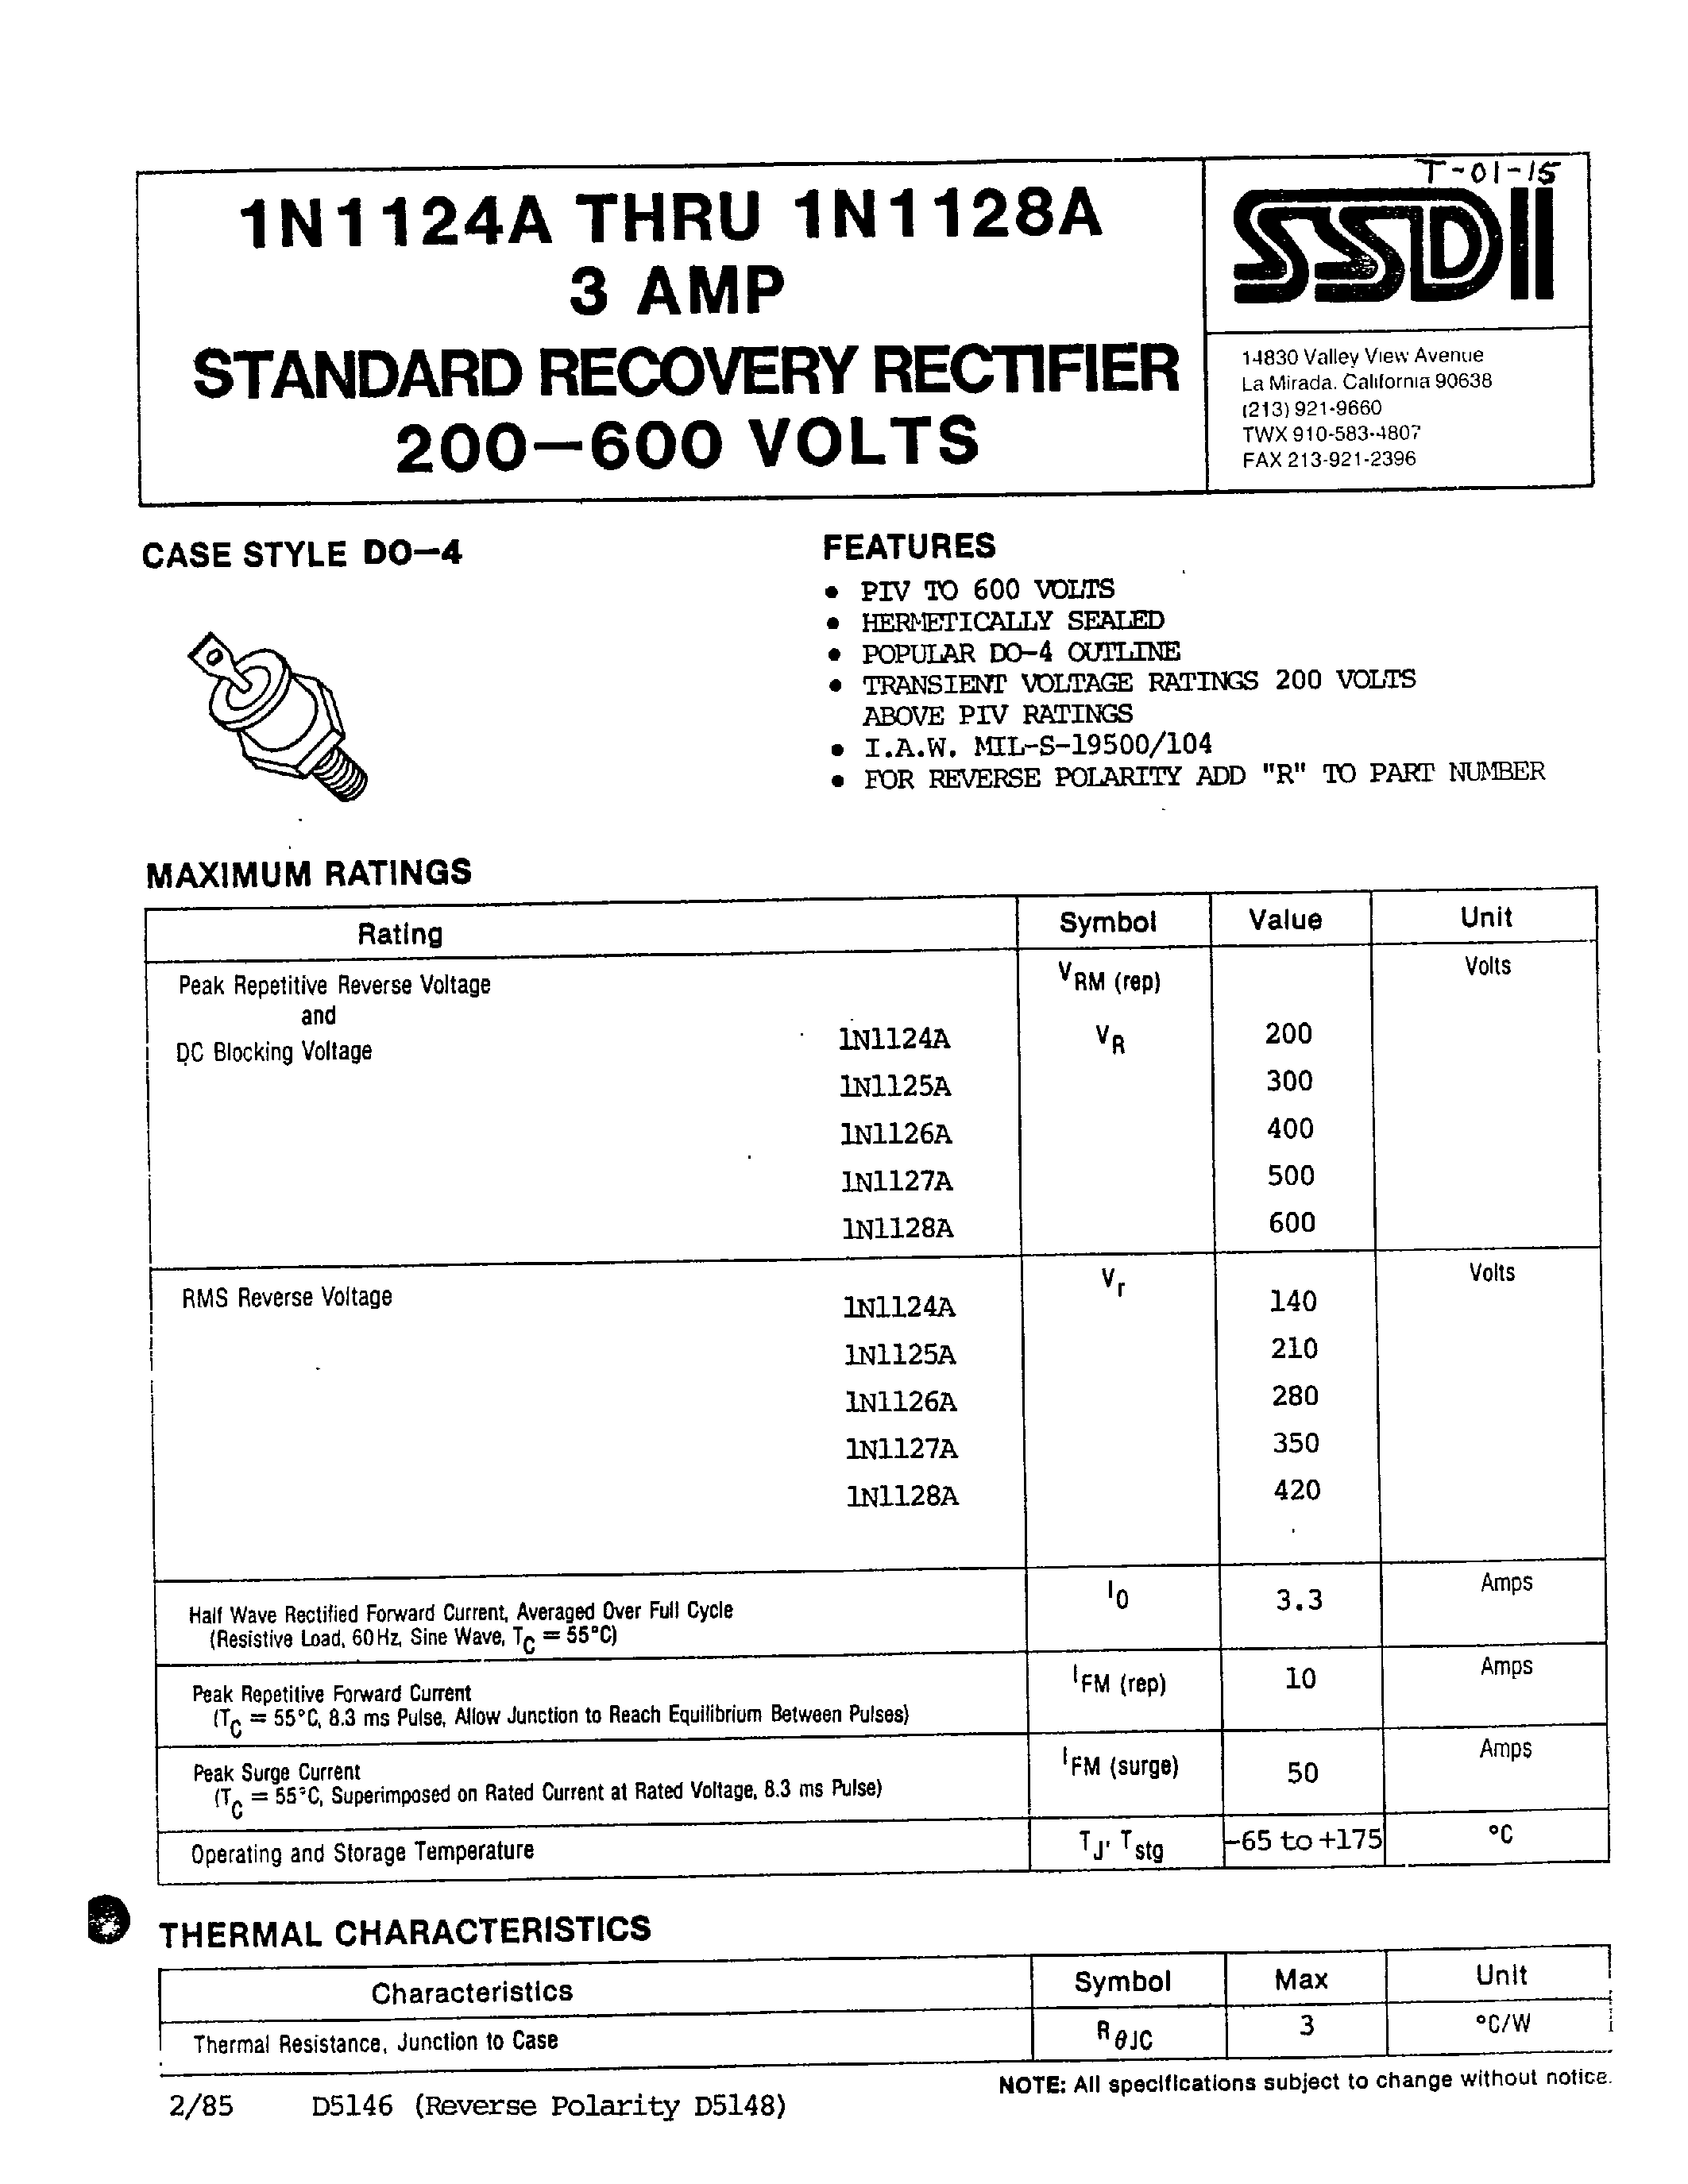 Datasheet 1N1127A - (1N1124A - 1N1128A) STANDARD RECOVERY RECTIFIER page 1